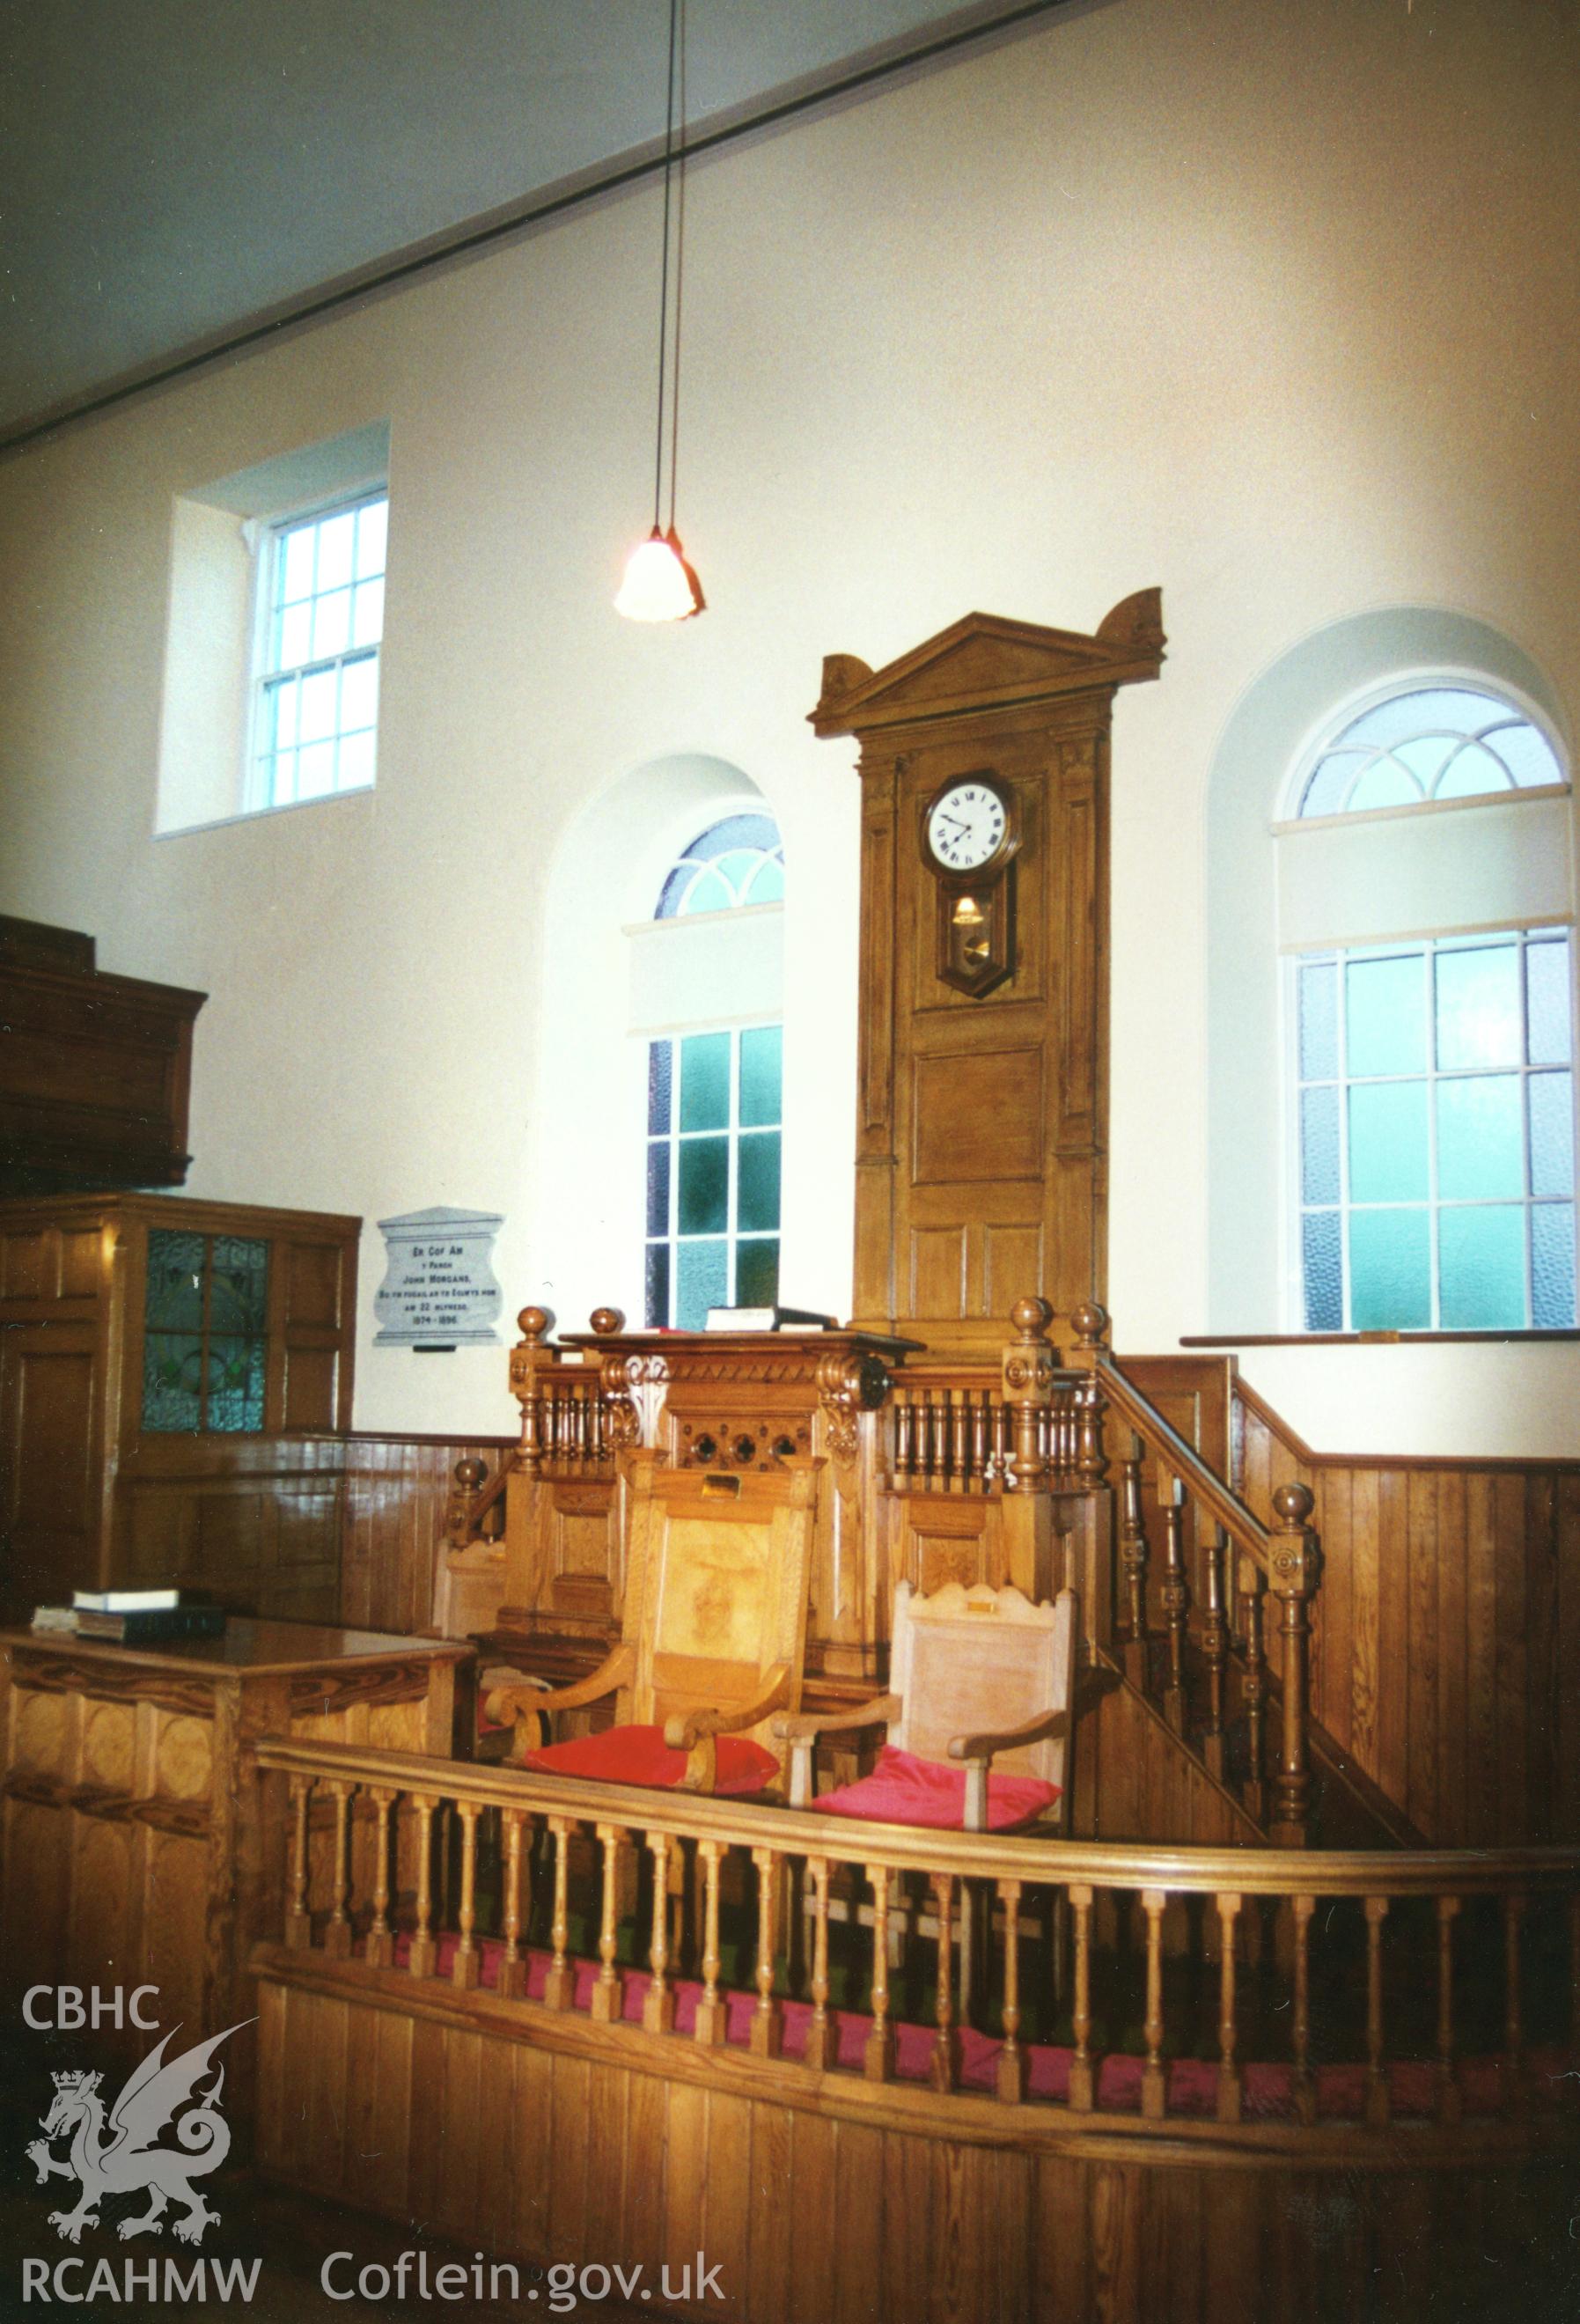 Digital copy of a colour photograph showing an interior view of the Rhiw-bwys Welsh Calvinistic Methodist Chapel,  taken by Robert Scourfield, c.1996.